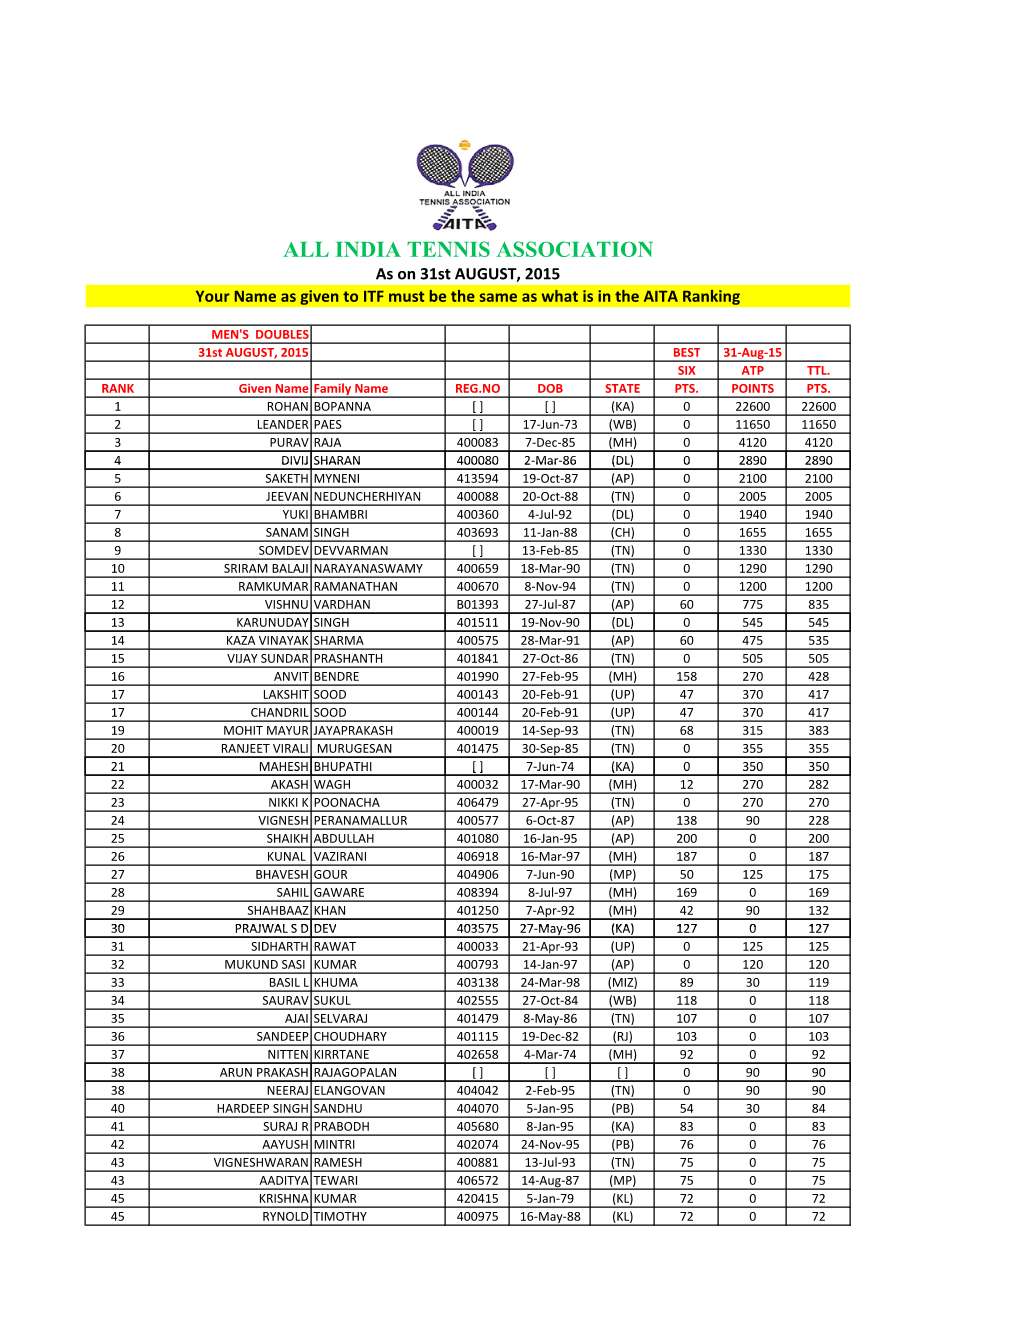 ALL INDIA TENNIS ASSOCIATION As on 31St AUGUST, 2015 Your Name As Given to ITF Must Be the Same As What Is in the AITA Ranking